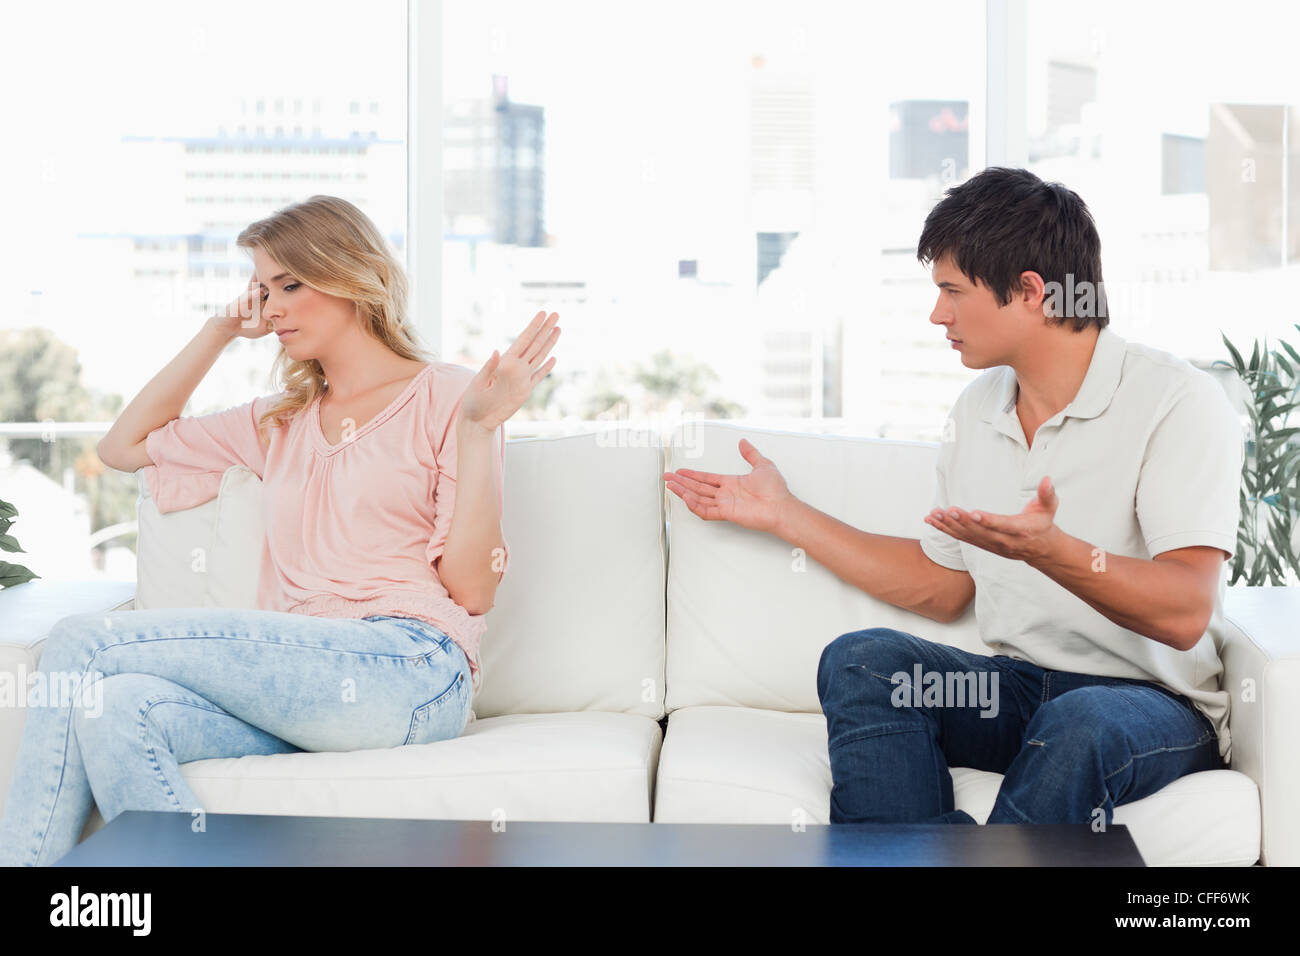 Man trying to apologise but the woman is not interested in it Stock Photo